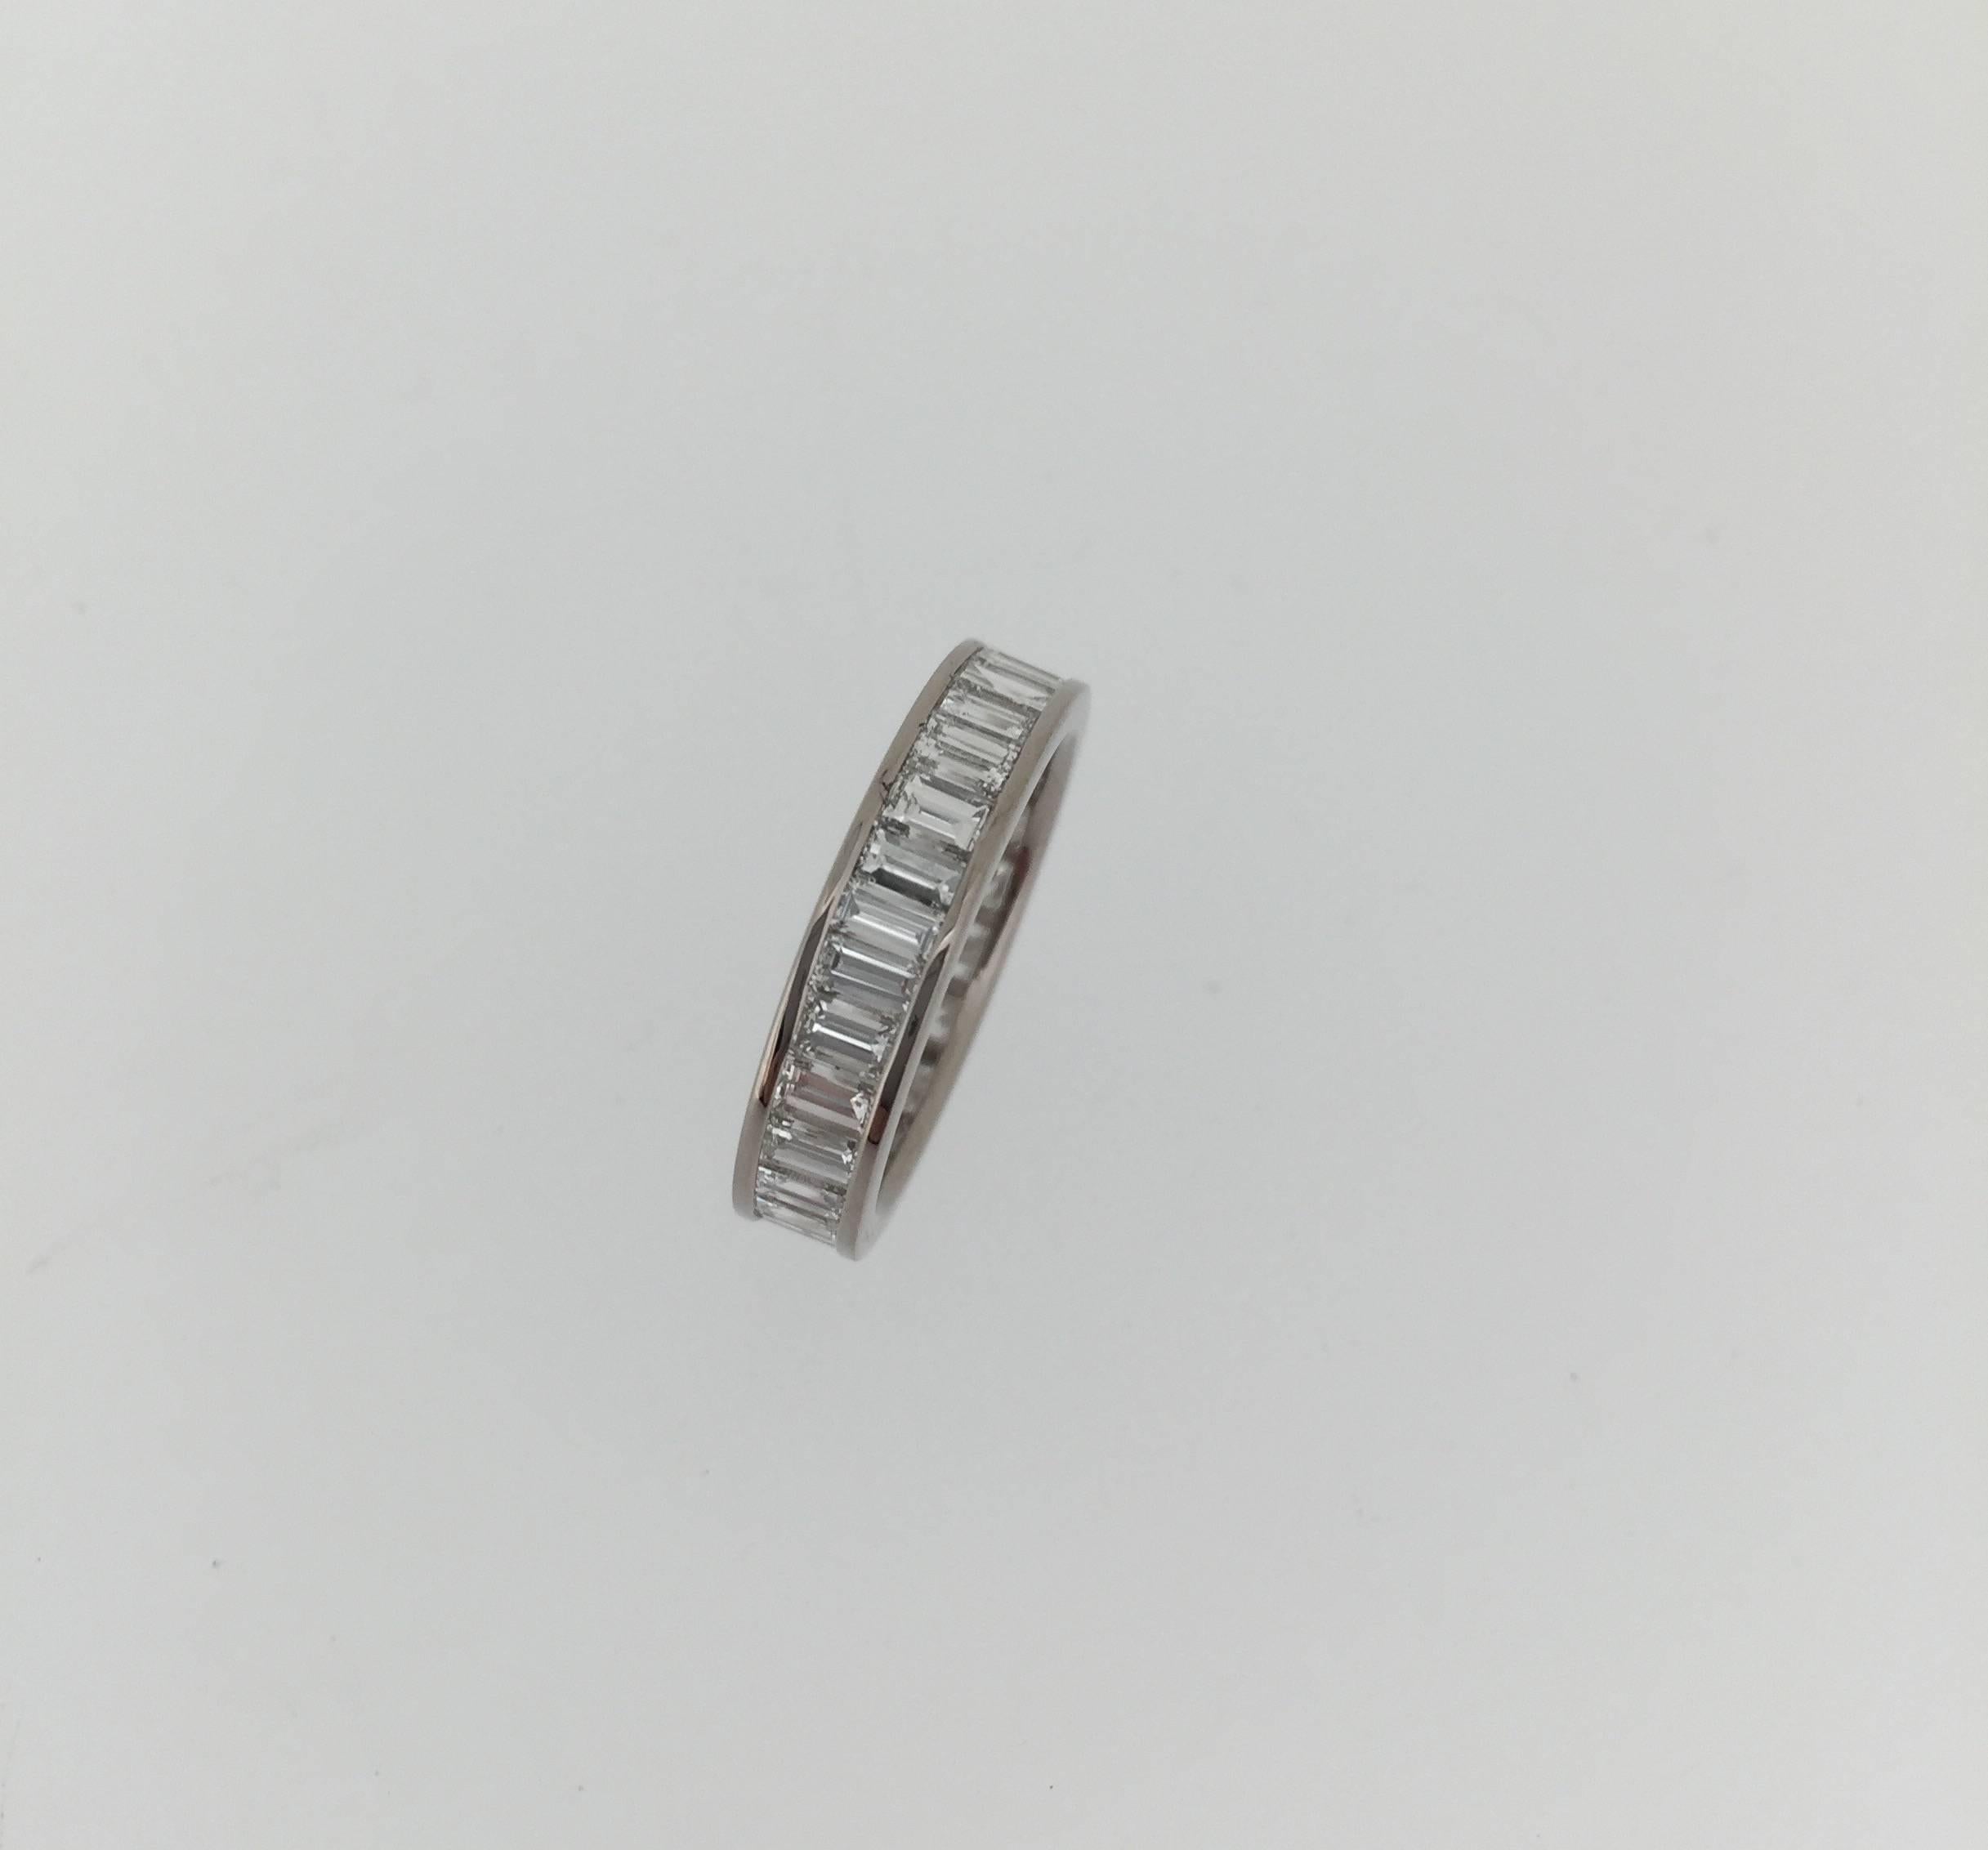 This custom made full diamond eternity ring is invisibly-set with the finest quality baguette cut diamonds of G VS quality; set in 18k white gold channel setting all the way around. Approx. diamond weight is 3.5 carat. Crafted by master craftsmen in